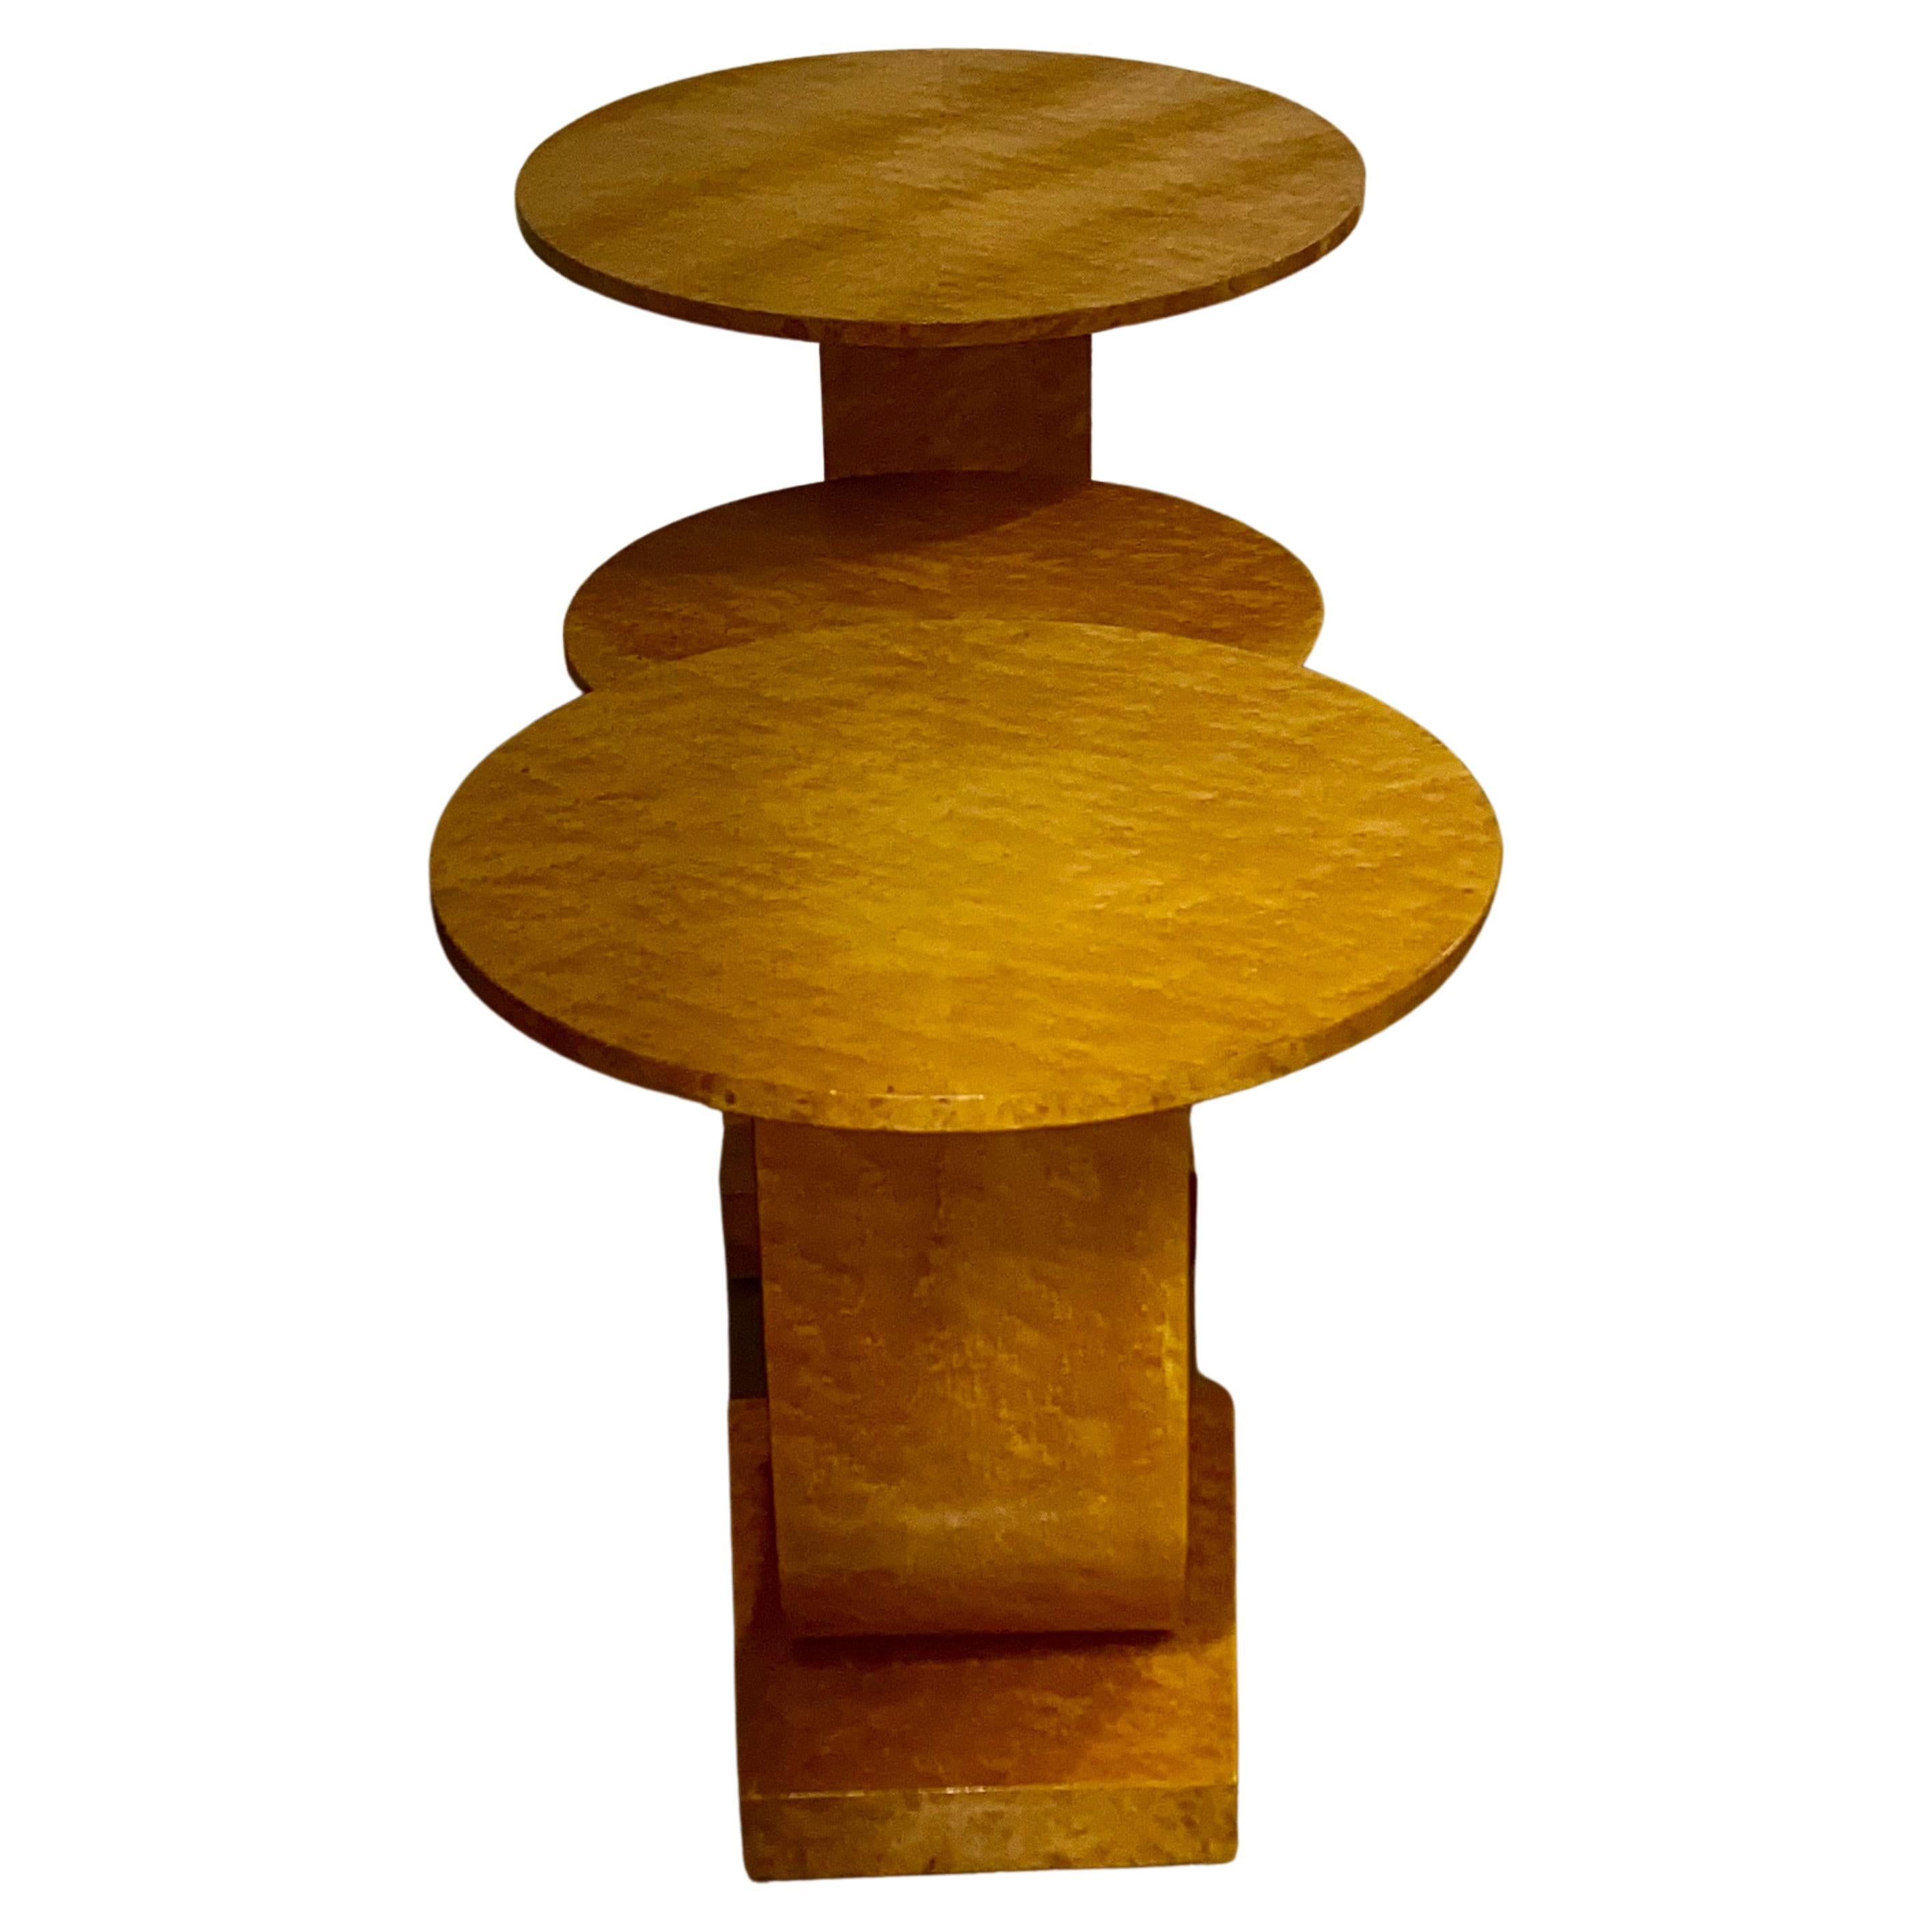 A Rare Art Deco Blonde Birds Eye Maple J Nest of Tables by Epstein Circa 1930 For Sale 1